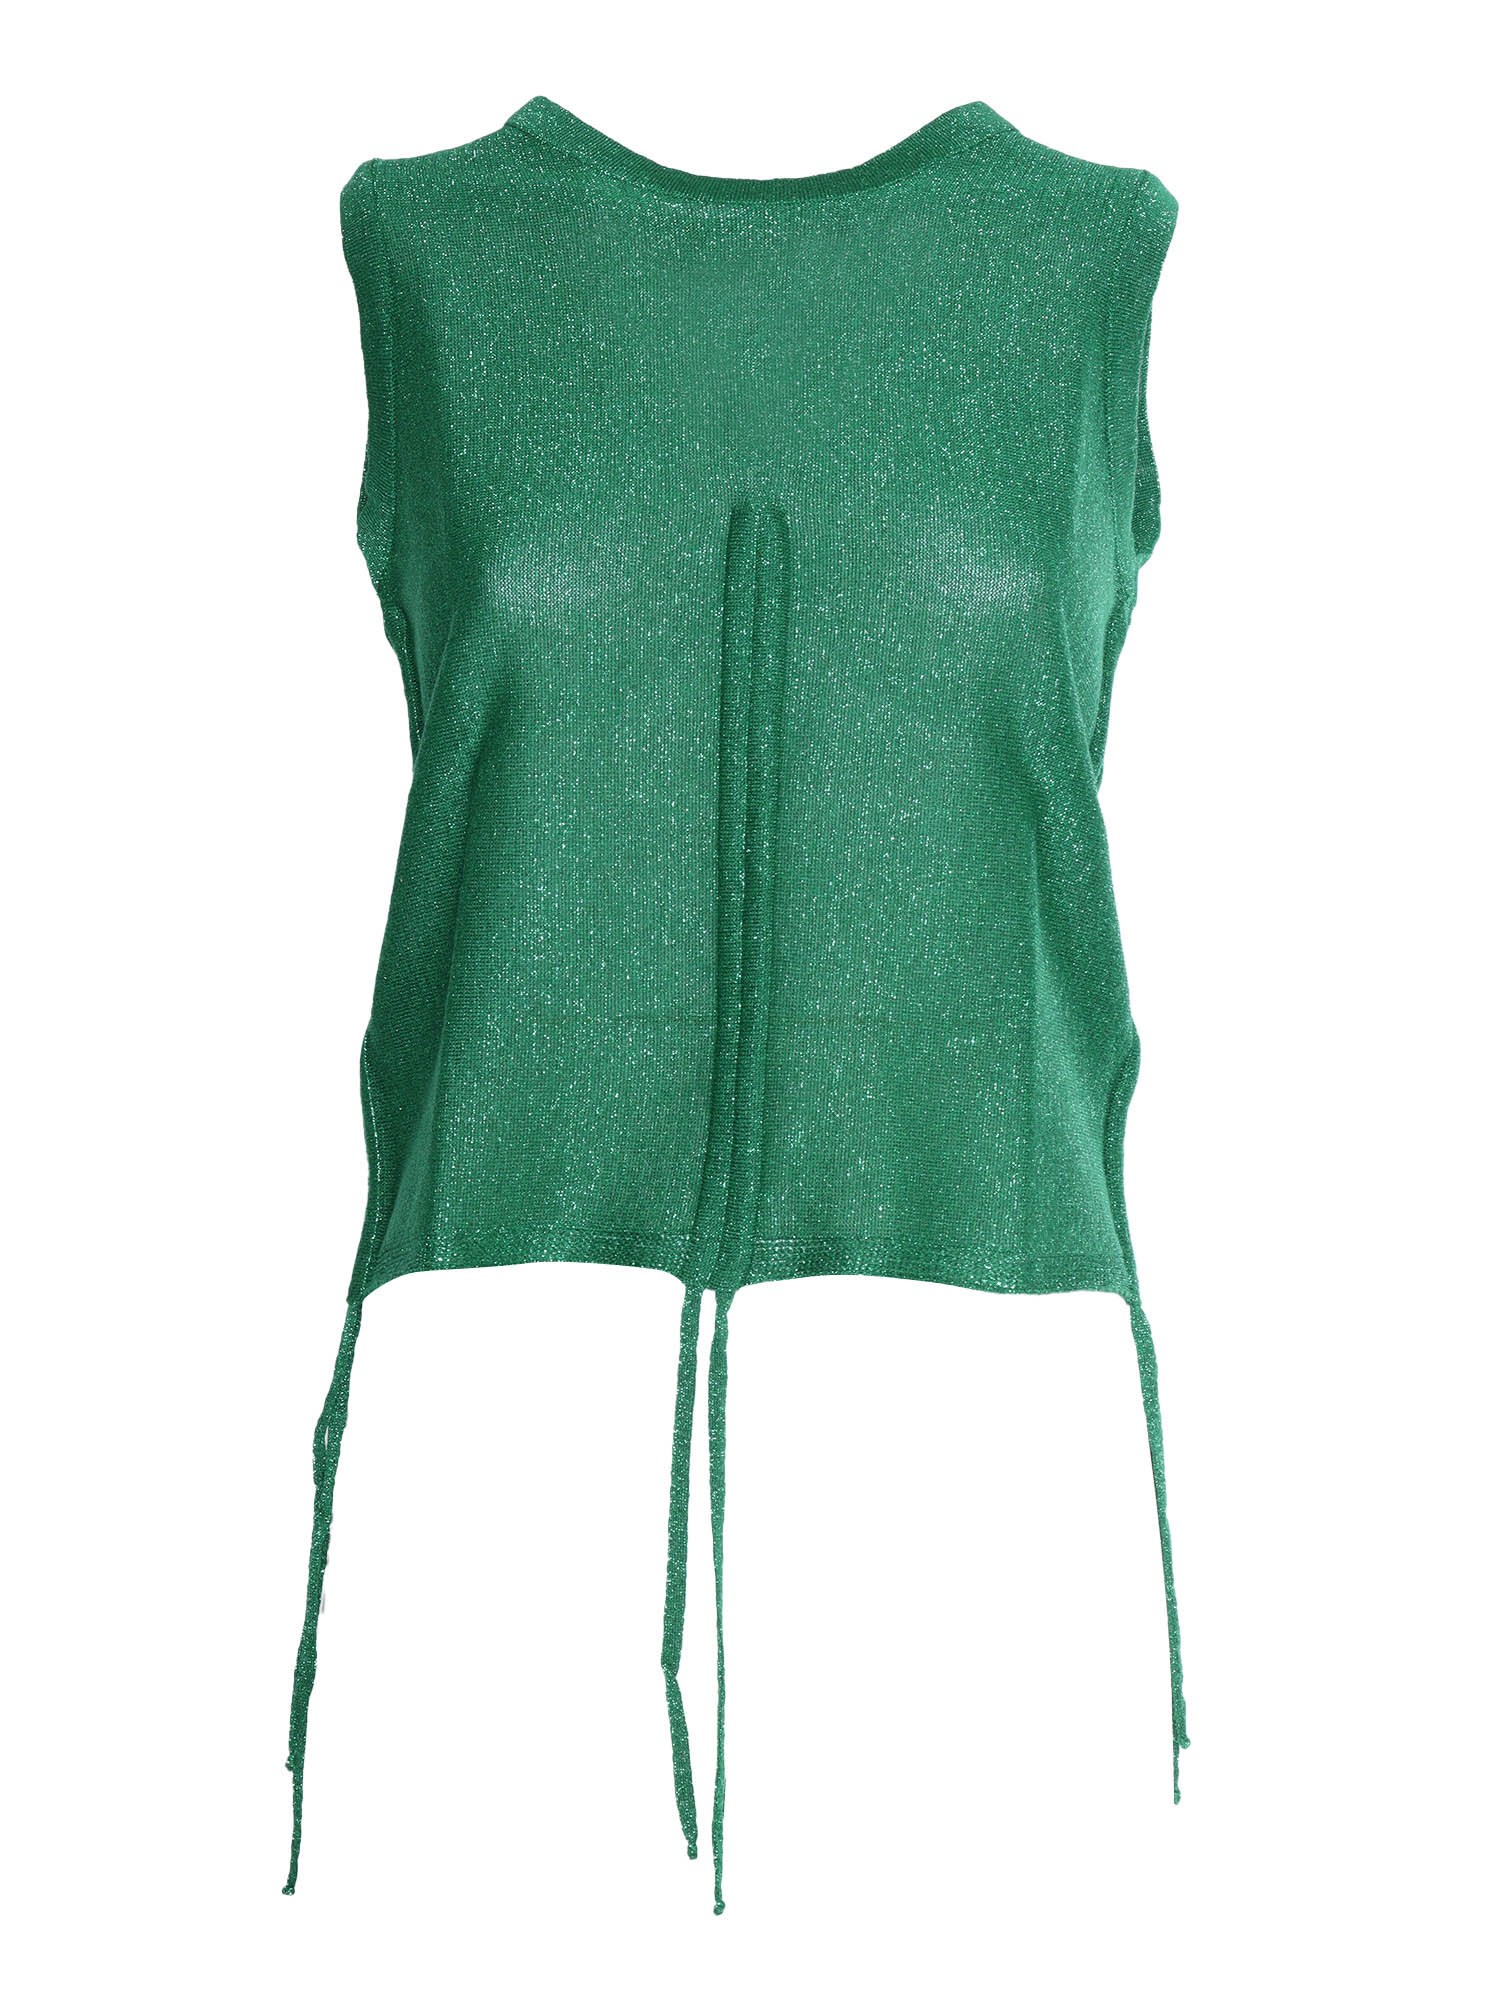 Ermanno Firenze Green Knitted Top